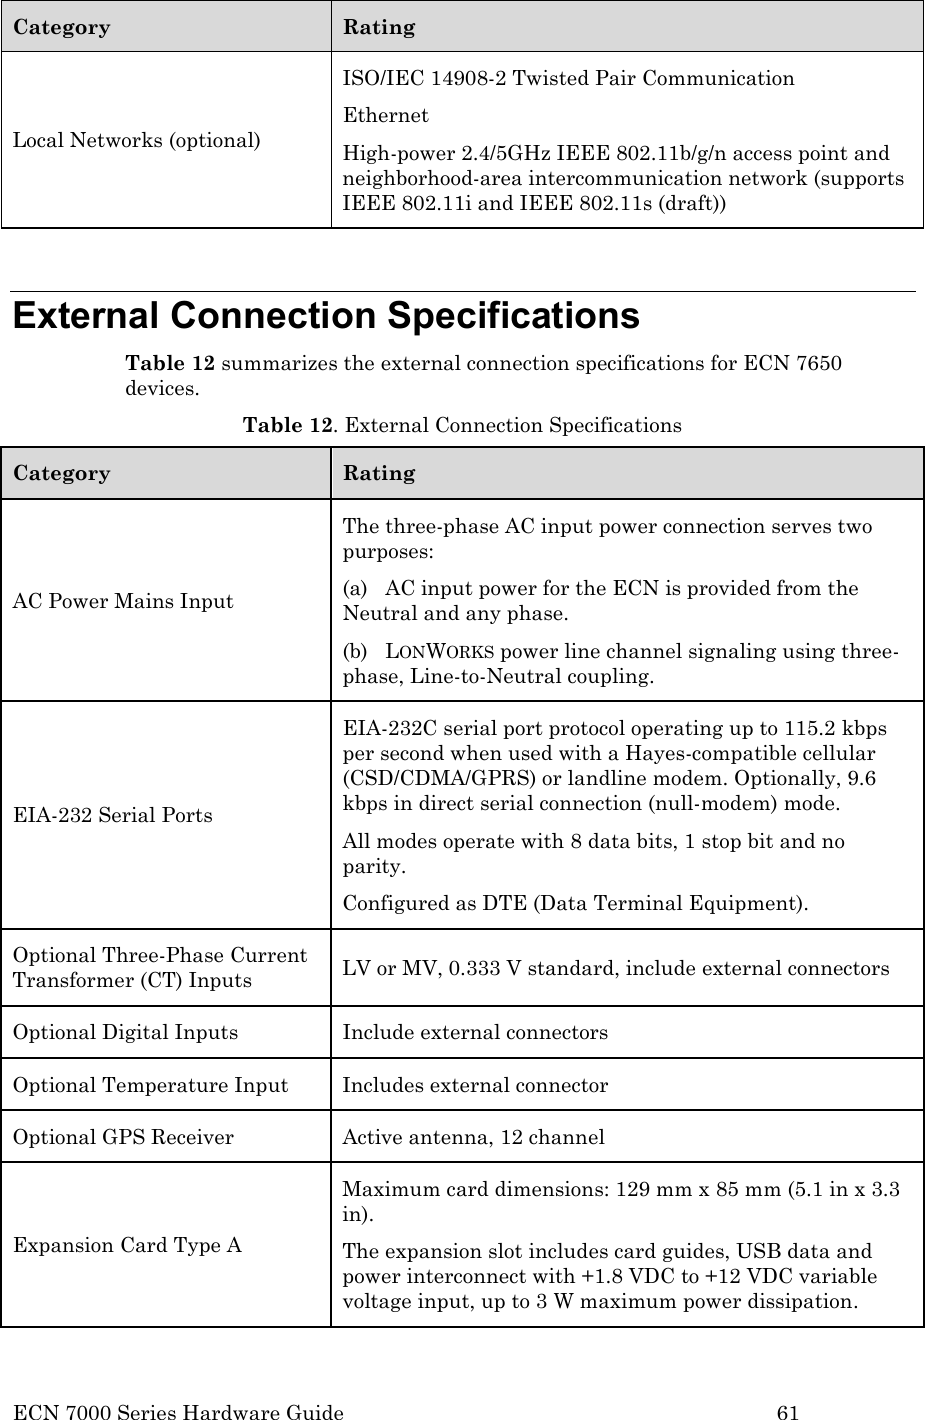  ECN 7000 Series Hardware Guide        61 Category Rating Local Networks (optional) ISO/IEC 14908-2 Twisted Pair Communication Ethernet High-power 2.4/5GHz IEEE 802.11b/g/n access point and neighborhood-area intercommunication network (supports IEEE 802.11i and IEEE 802.11s (draft))  External Connection Specifications Table 12 summarizes the external connection specifications for ECN 7650 devices. Table 12. External Connection Specifications Category Rating AC Power Mains Input The three-phase AC input power connection serves two purposes:  (a)   AC input power for the ECN is provided from the Neutral and any phase.  (b)   LONWORKS power line channel signaling using three-phase, Line-to-Neutral coupling. EIA-232 Serial Ports EIA-232C serial port protocol operating up to 115.2 kbps per second when used with a Hayes-compatible cellular (CSD/CDMA/GPRS) or landline modem. Optionally, 9.6 kbps in direct serial connection (null-modem) mode.  All modes operate with 8 data bits, 1 stop bit and no parity.   Configured as DTE (Data Terminal Equipment). Optional Three-Phase Current Transformer (CT) Inputs LV or MV, 0.333 V standard, include external connectors Optional Digital Inputs  Include external connectors Optional Temperature Input  Includes external connector Optional GPS Receiver  Active antenna, 12 channel Expansion Card Type A Maximum card dimensions: 129 mm x 85 mm (5.1 in x 3.3 in).   The expansion slot includes card guides, USB data and power interconnect with +1.8 VDC to +12 VDC variable voltage input, up to 3 W maximum power dissipation. 